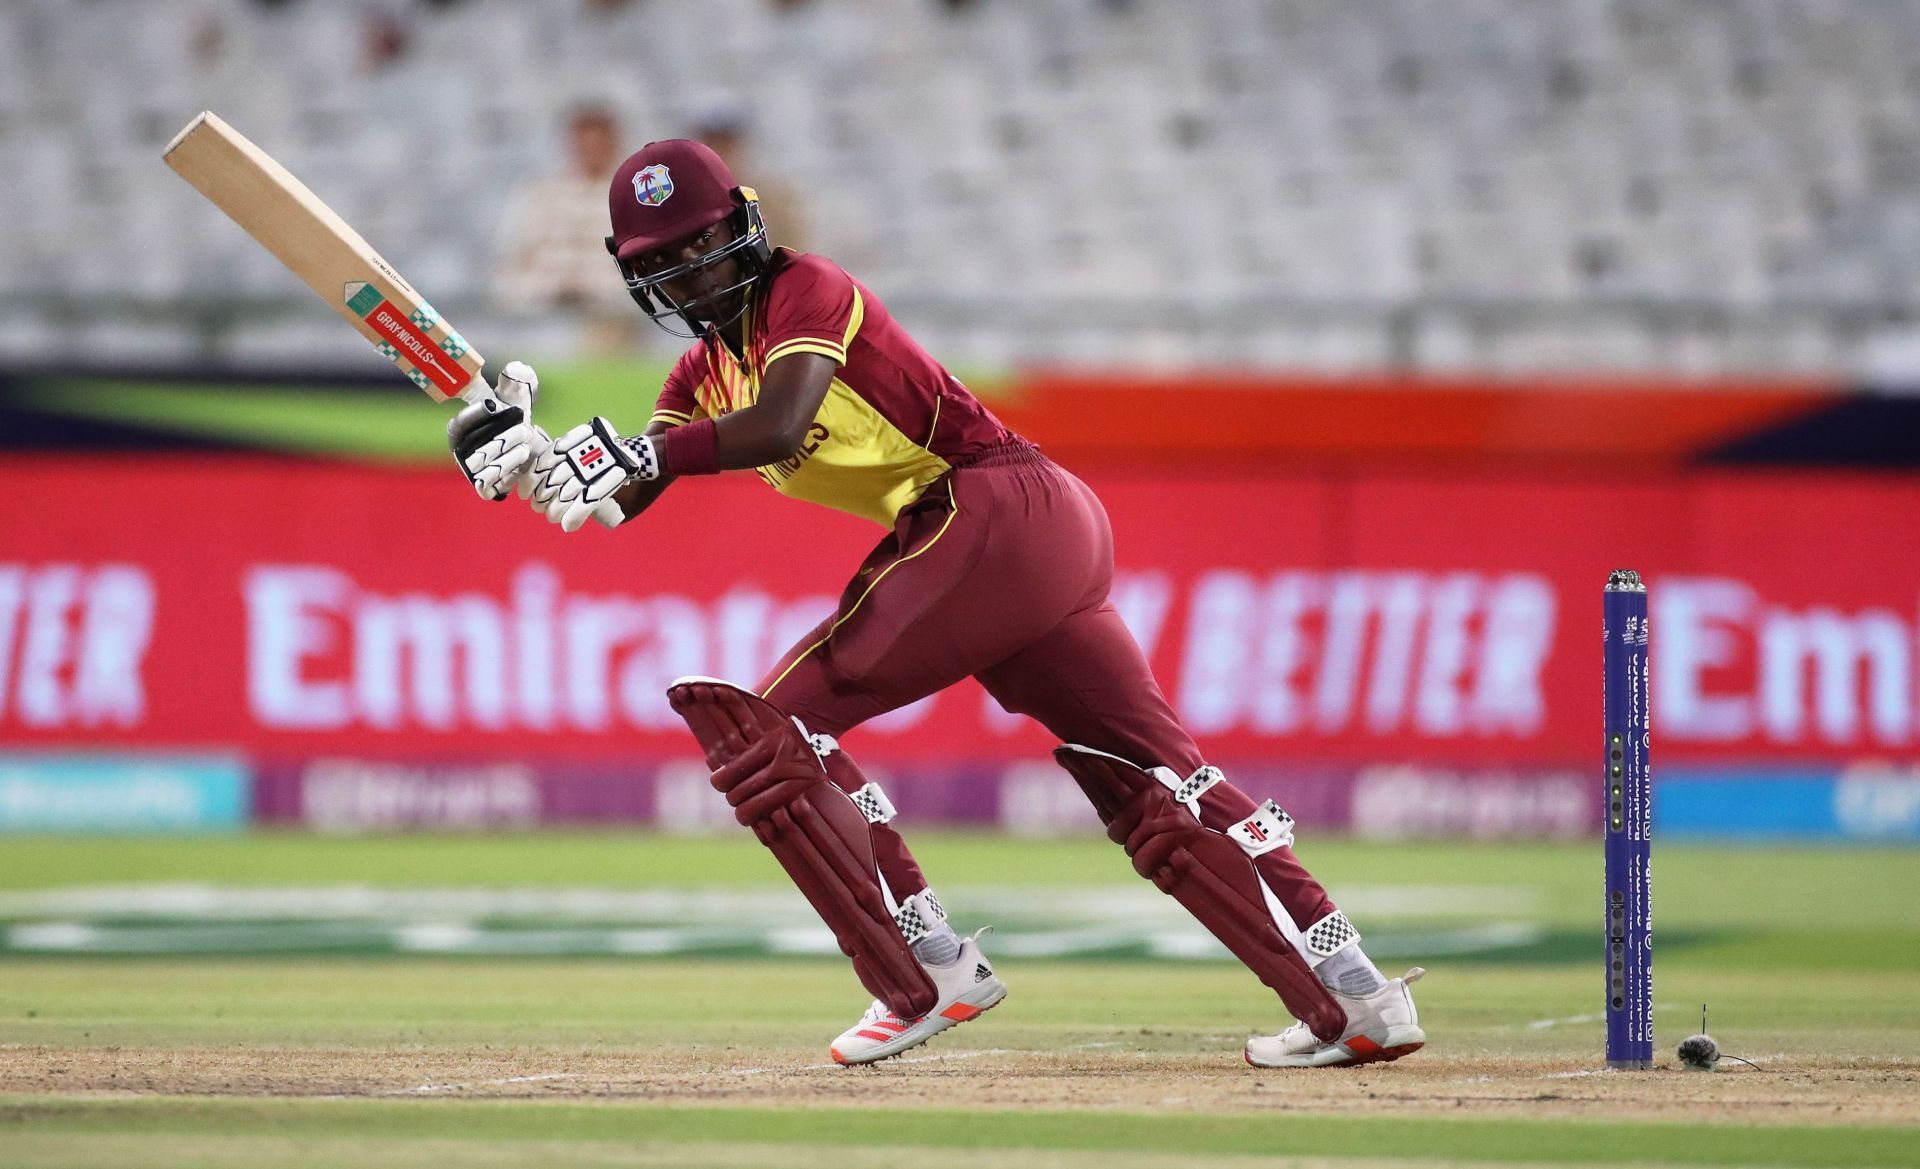 Rashada Williams in action (Image Courtesy: T20 World Cup)